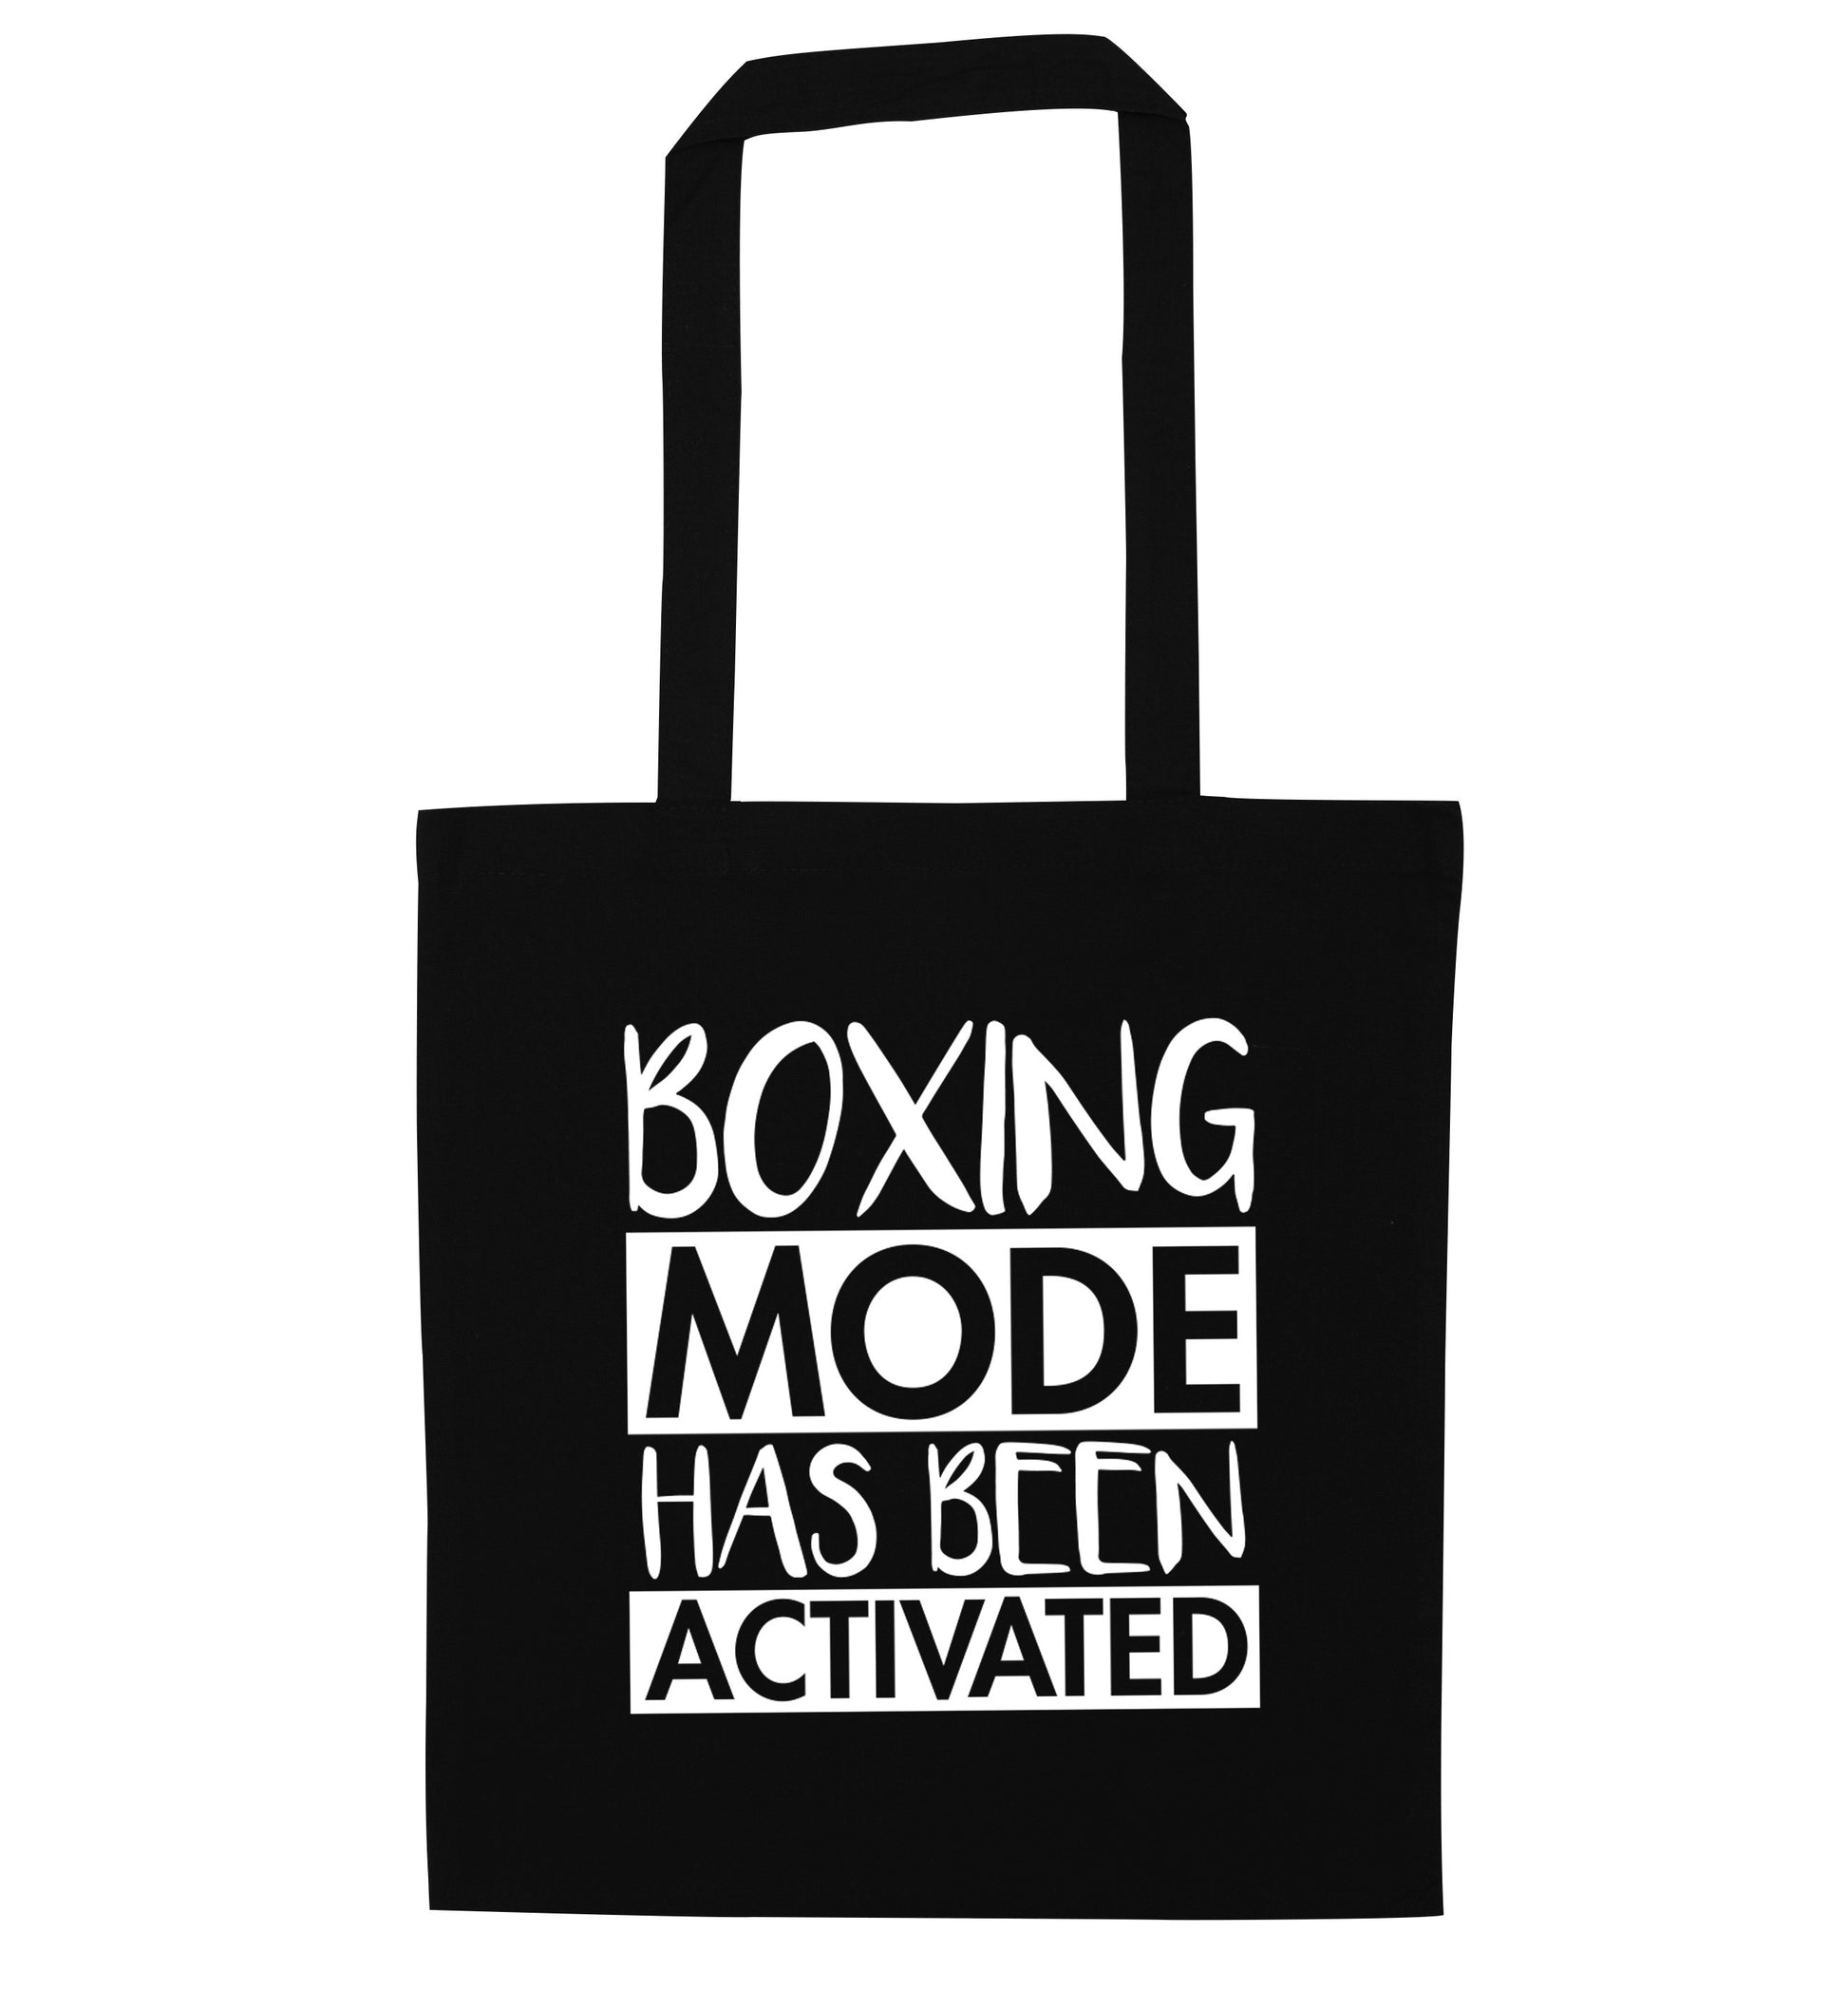 Boxing mode activated black tote bag